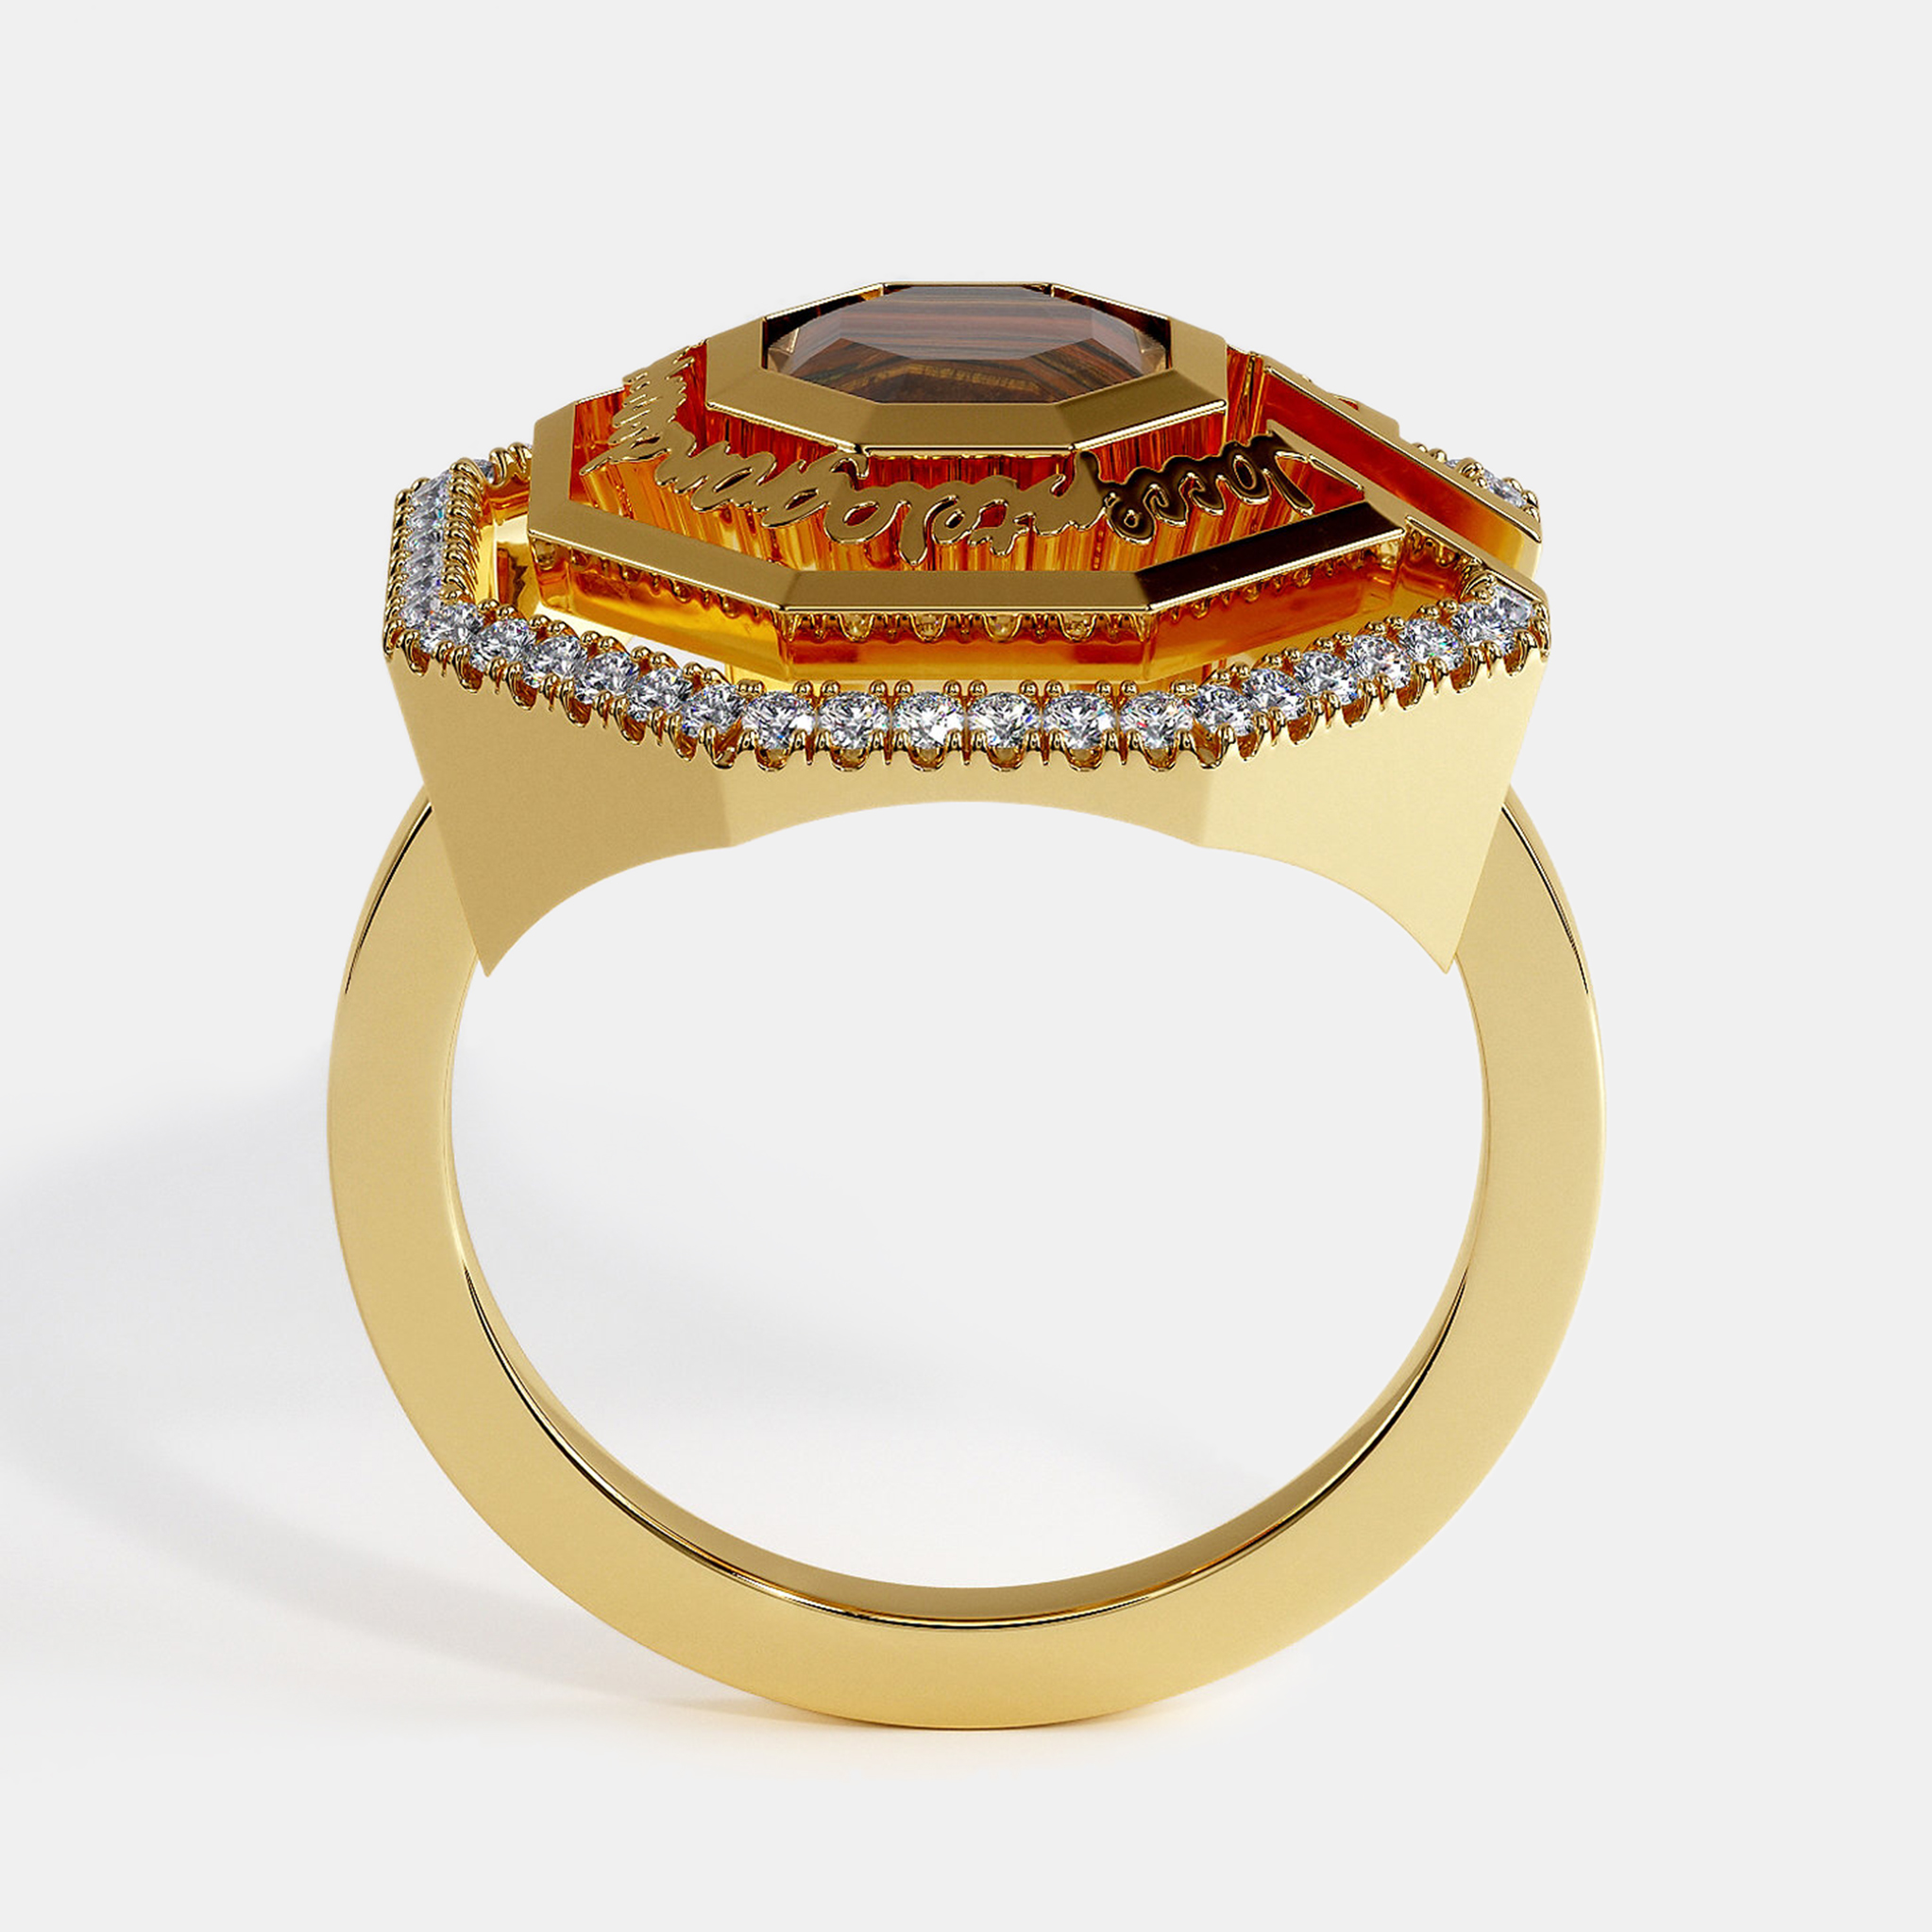 Place Vendome Ring Vendome XIII Simone Yellow Gold And Eye Tiger Size 51